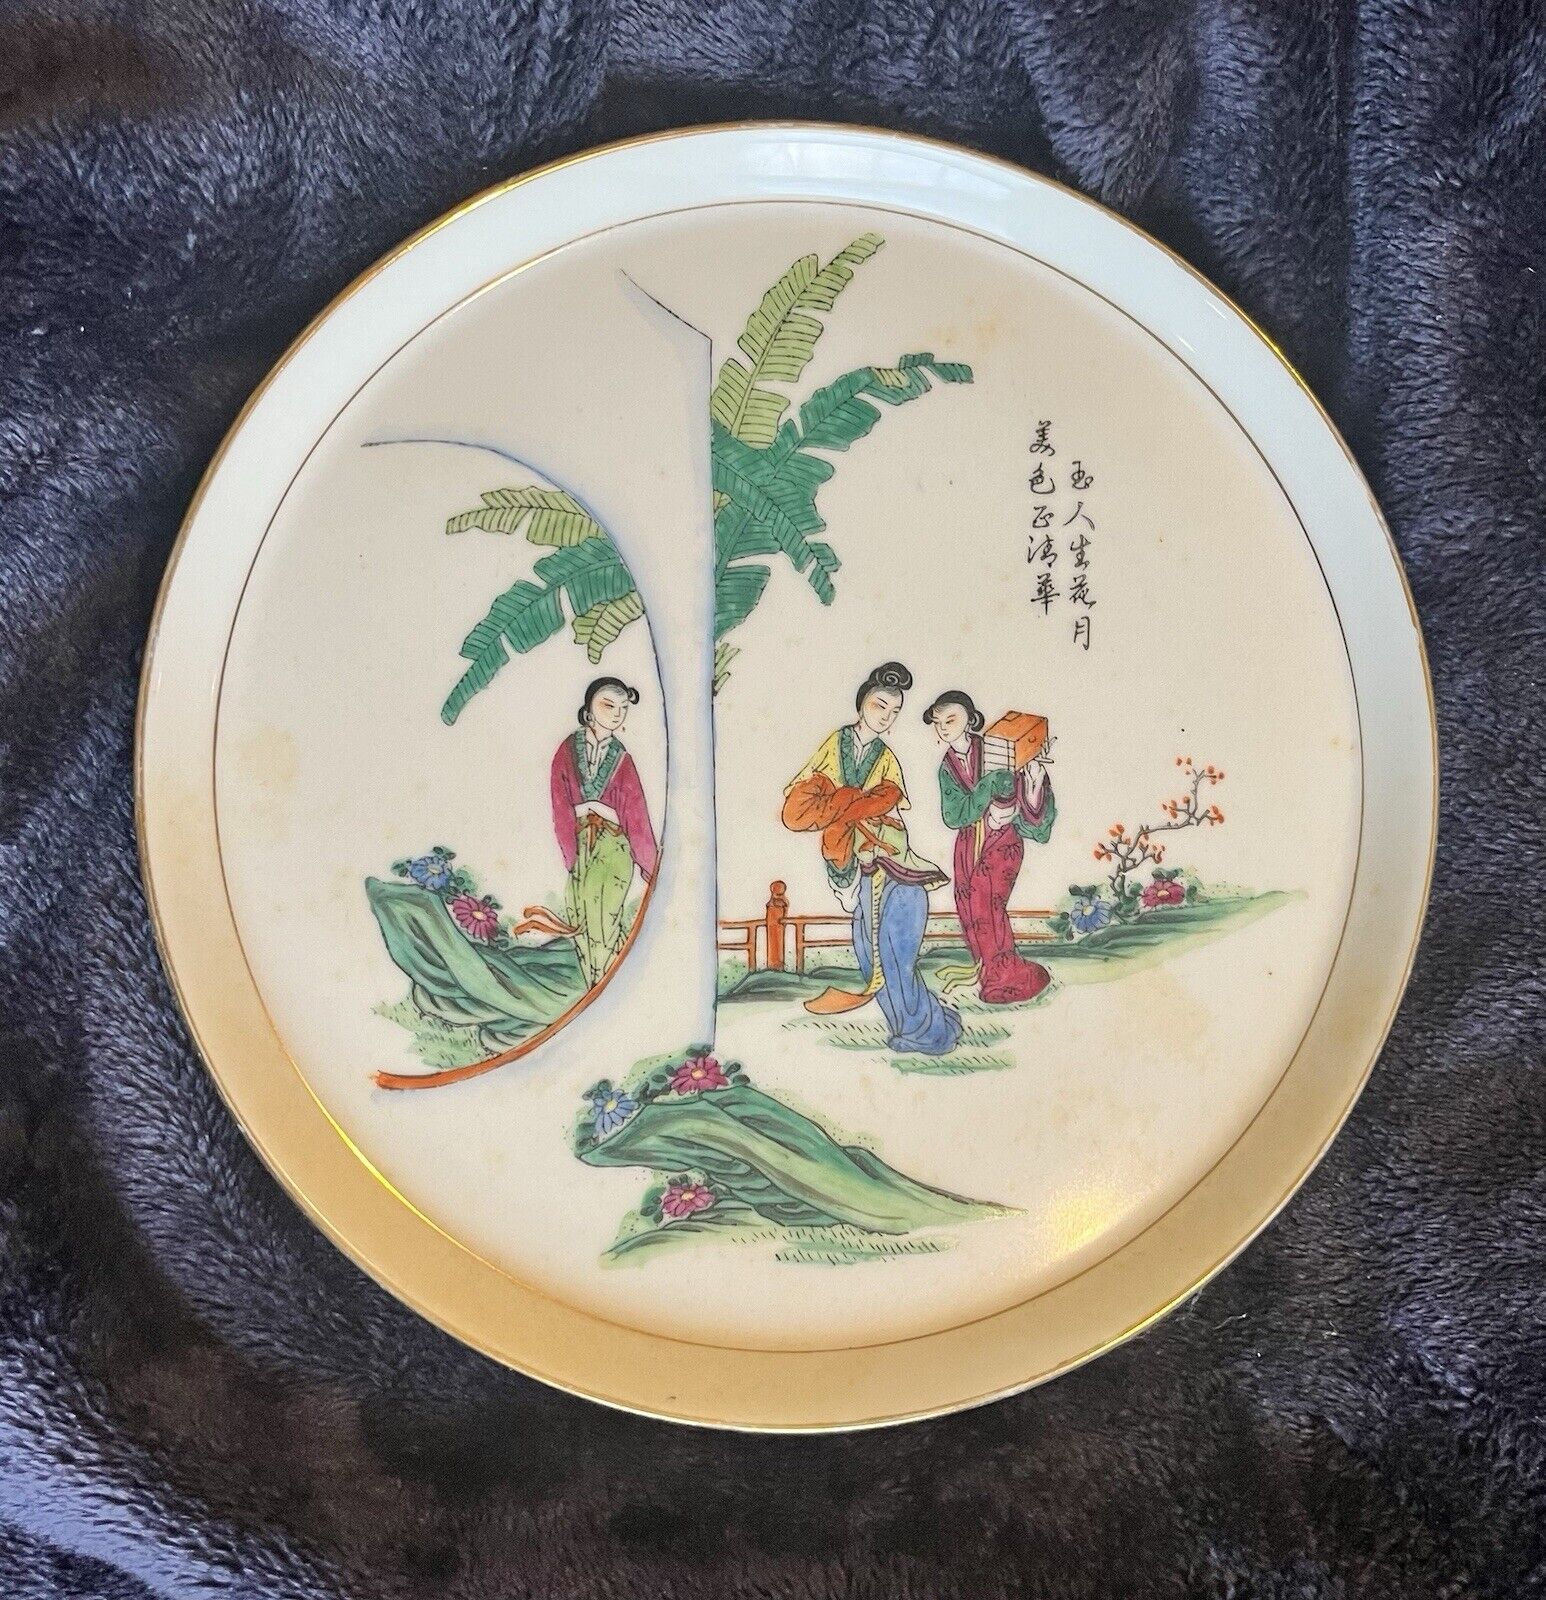 Vintage Chinese Plate With Calligraphy